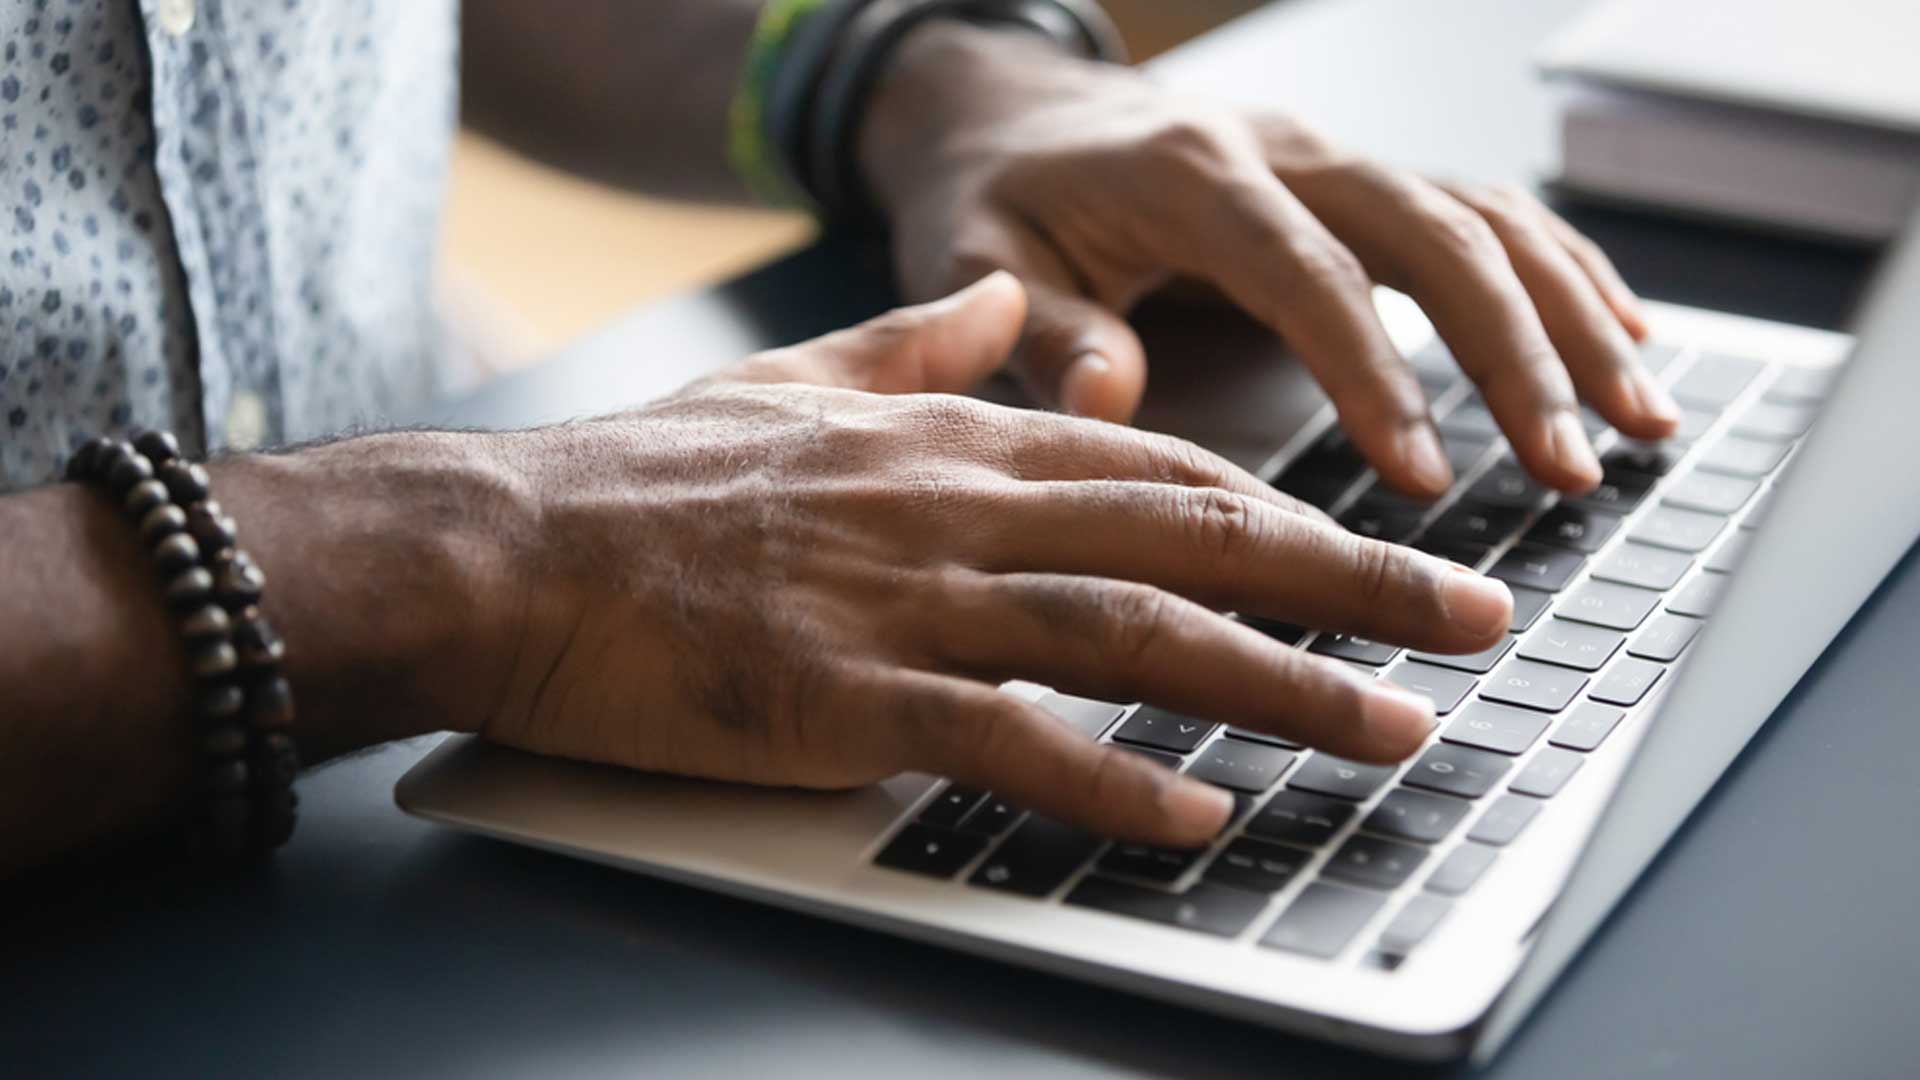 A person using a keyboard on a laptop, looking at the Commonwealth Scholarships FAQs.